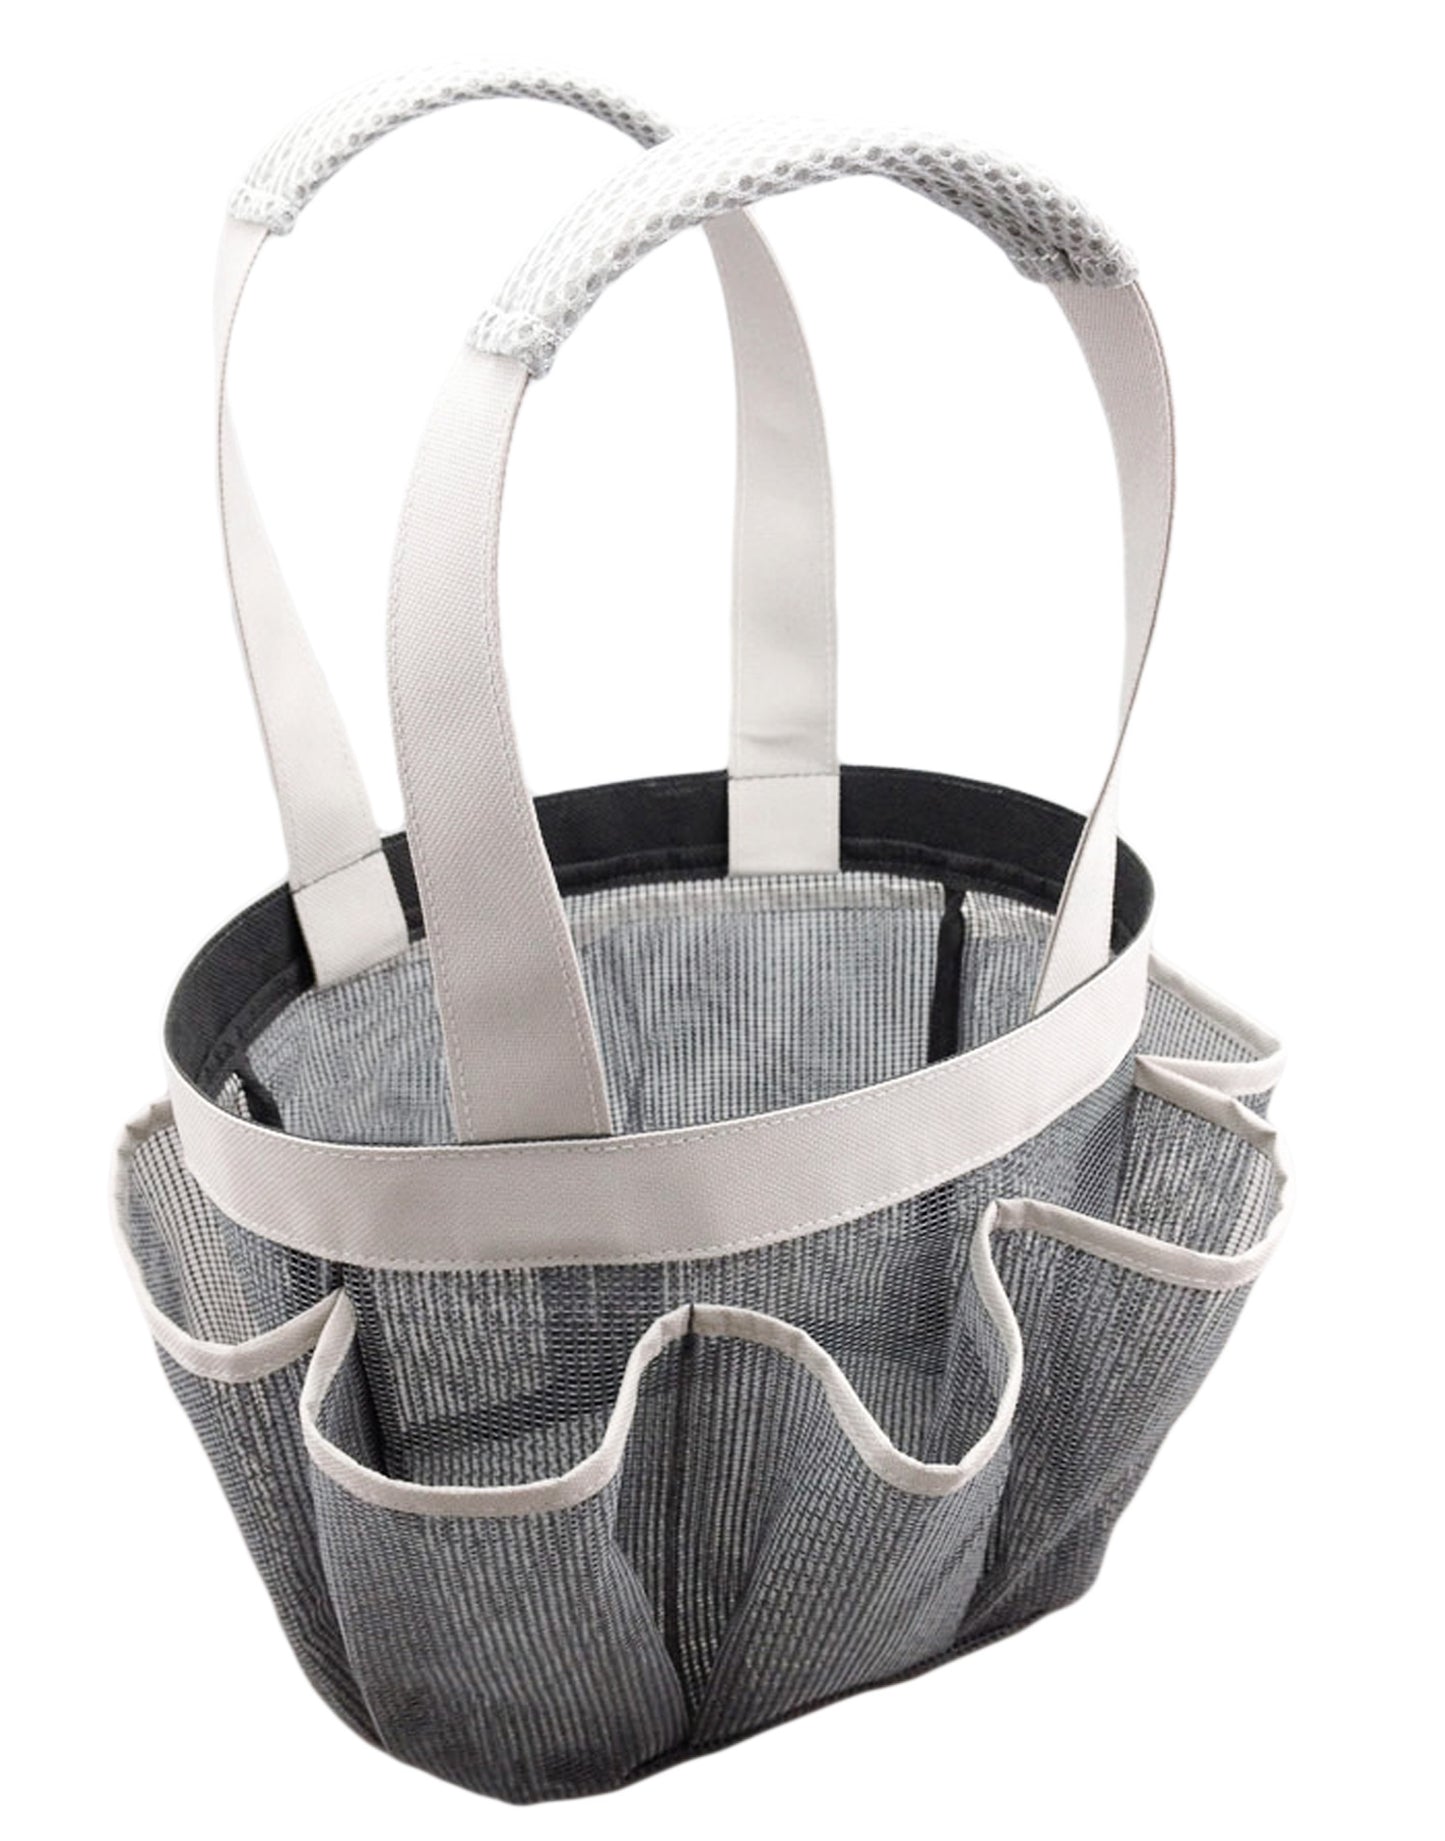 Quick Dry Shower Tote & Mesh Caddy, 7-pocket (Cool Grey)